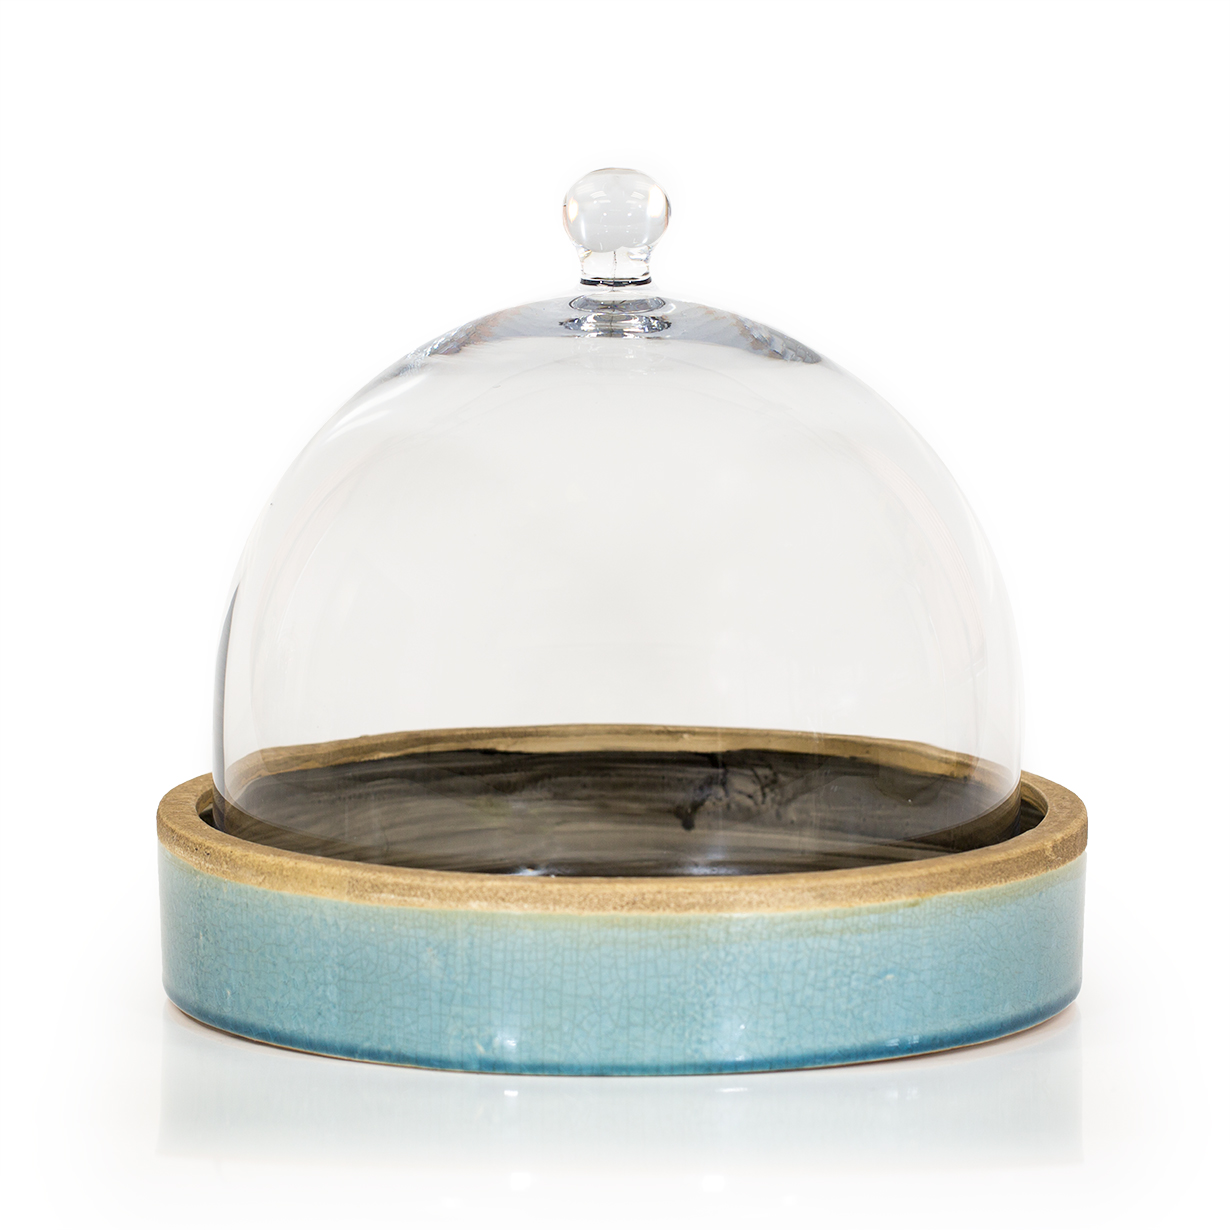 Ceramic Round Tray with Cloche (Large)